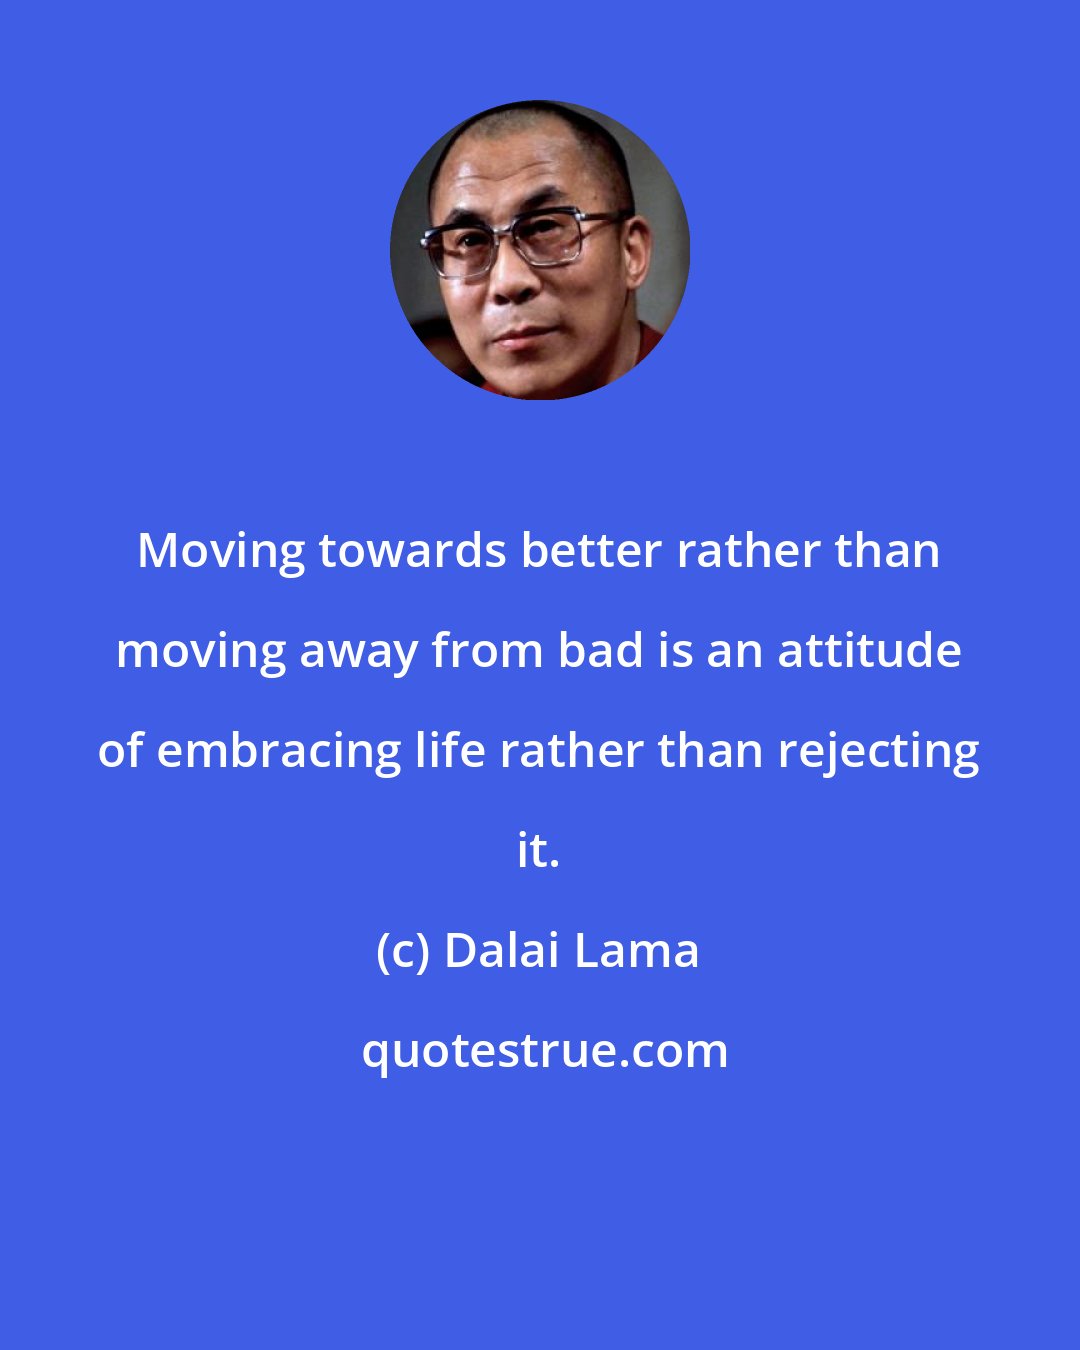 Dalai Lama: Moving towards better rather than moving away from bad is an attitude of embracing life rather than rejecting it.